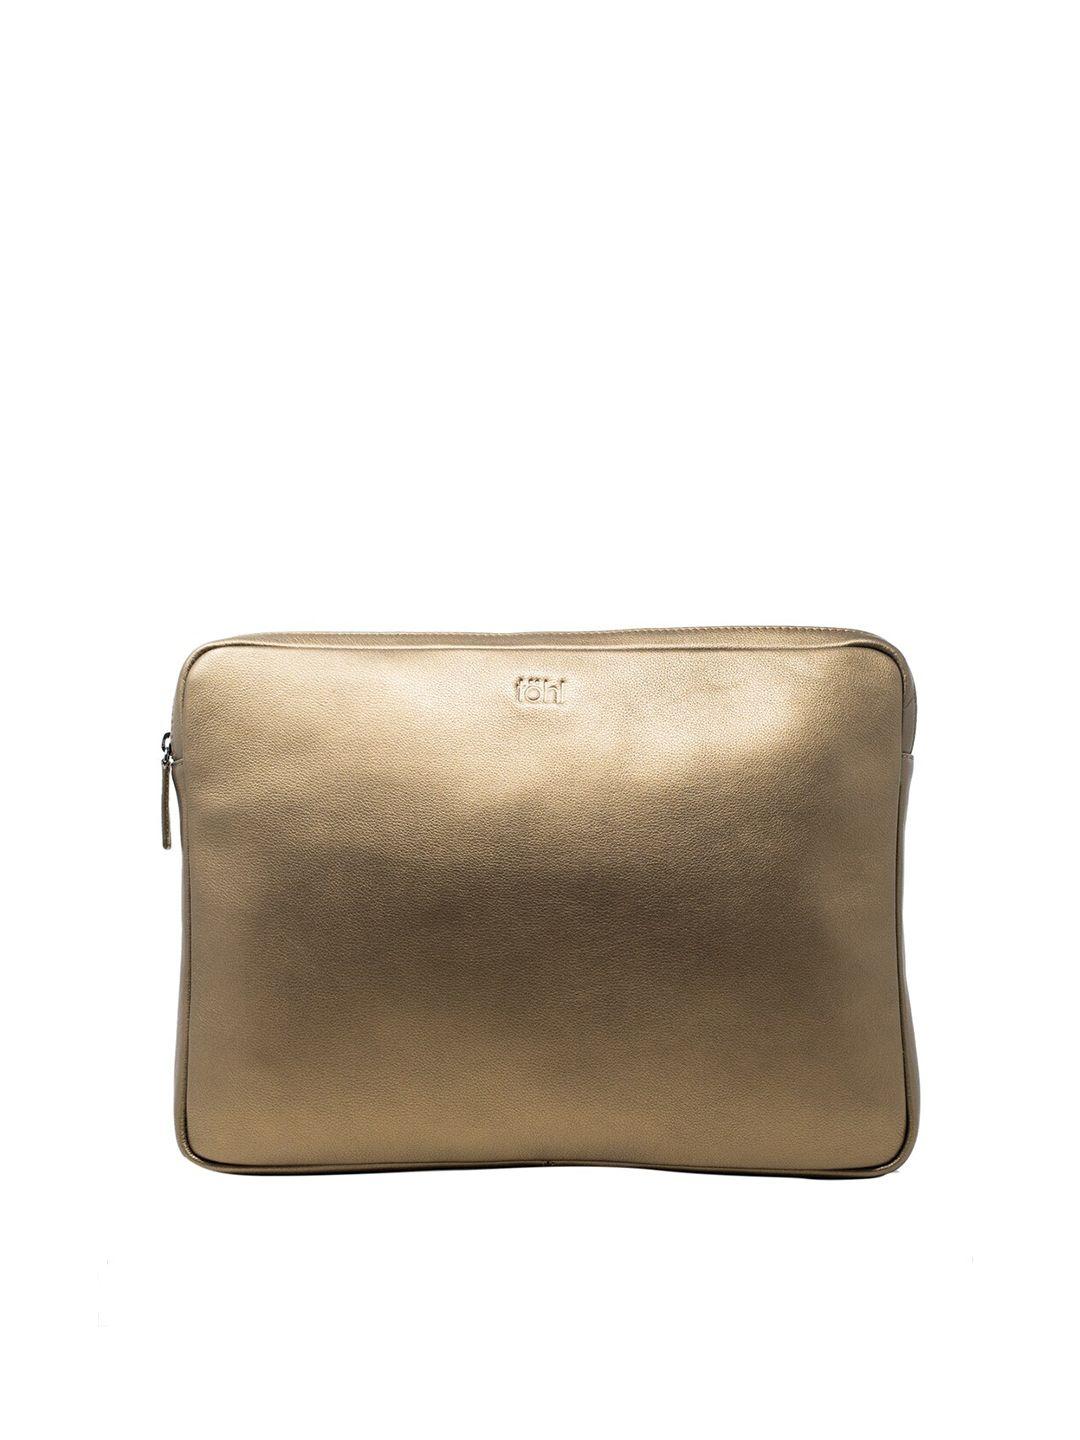 tohl unisex copper-toned leather laptop sleeve